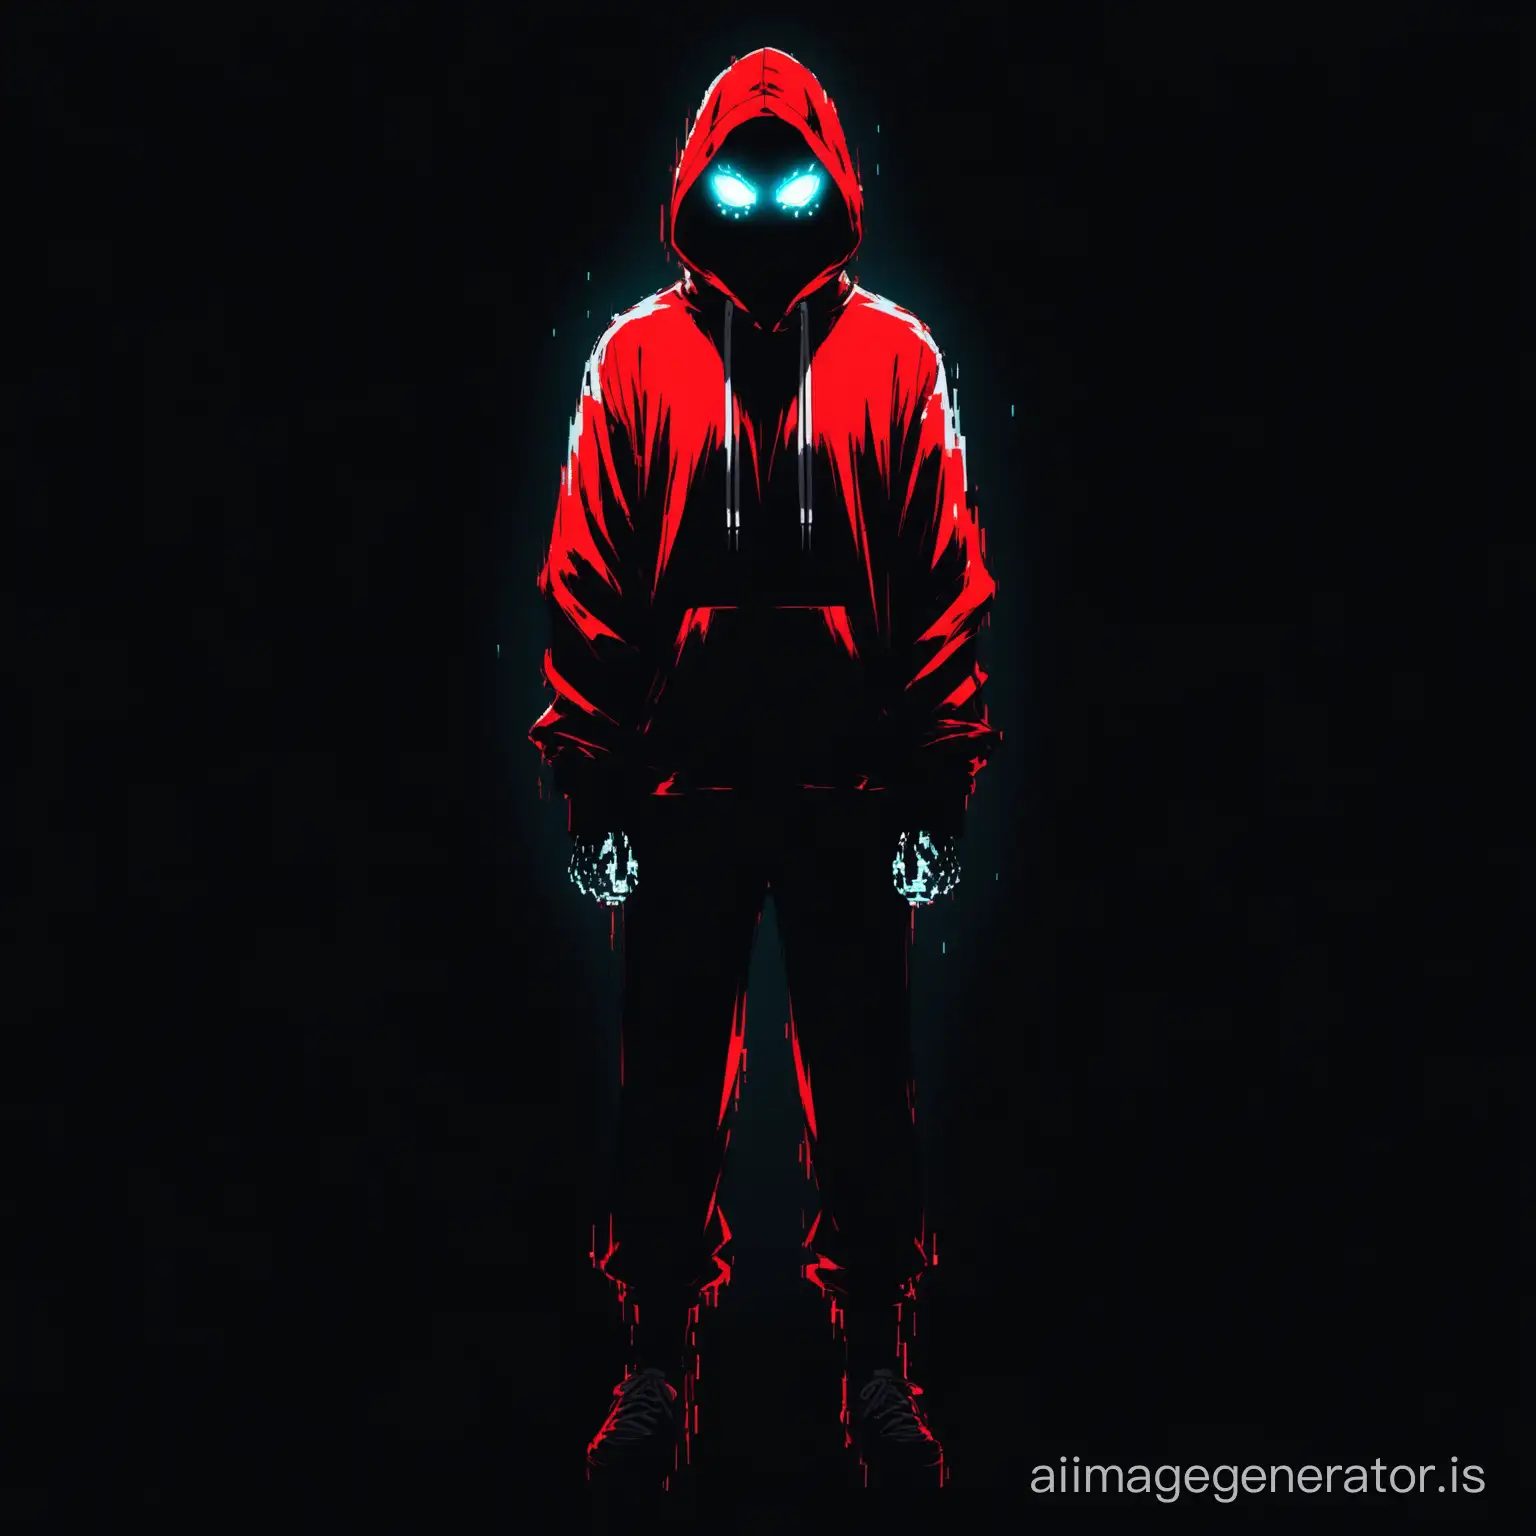 Mysterious-Figure-in-Red-Hoodie-with-Glowing-White-Eyes